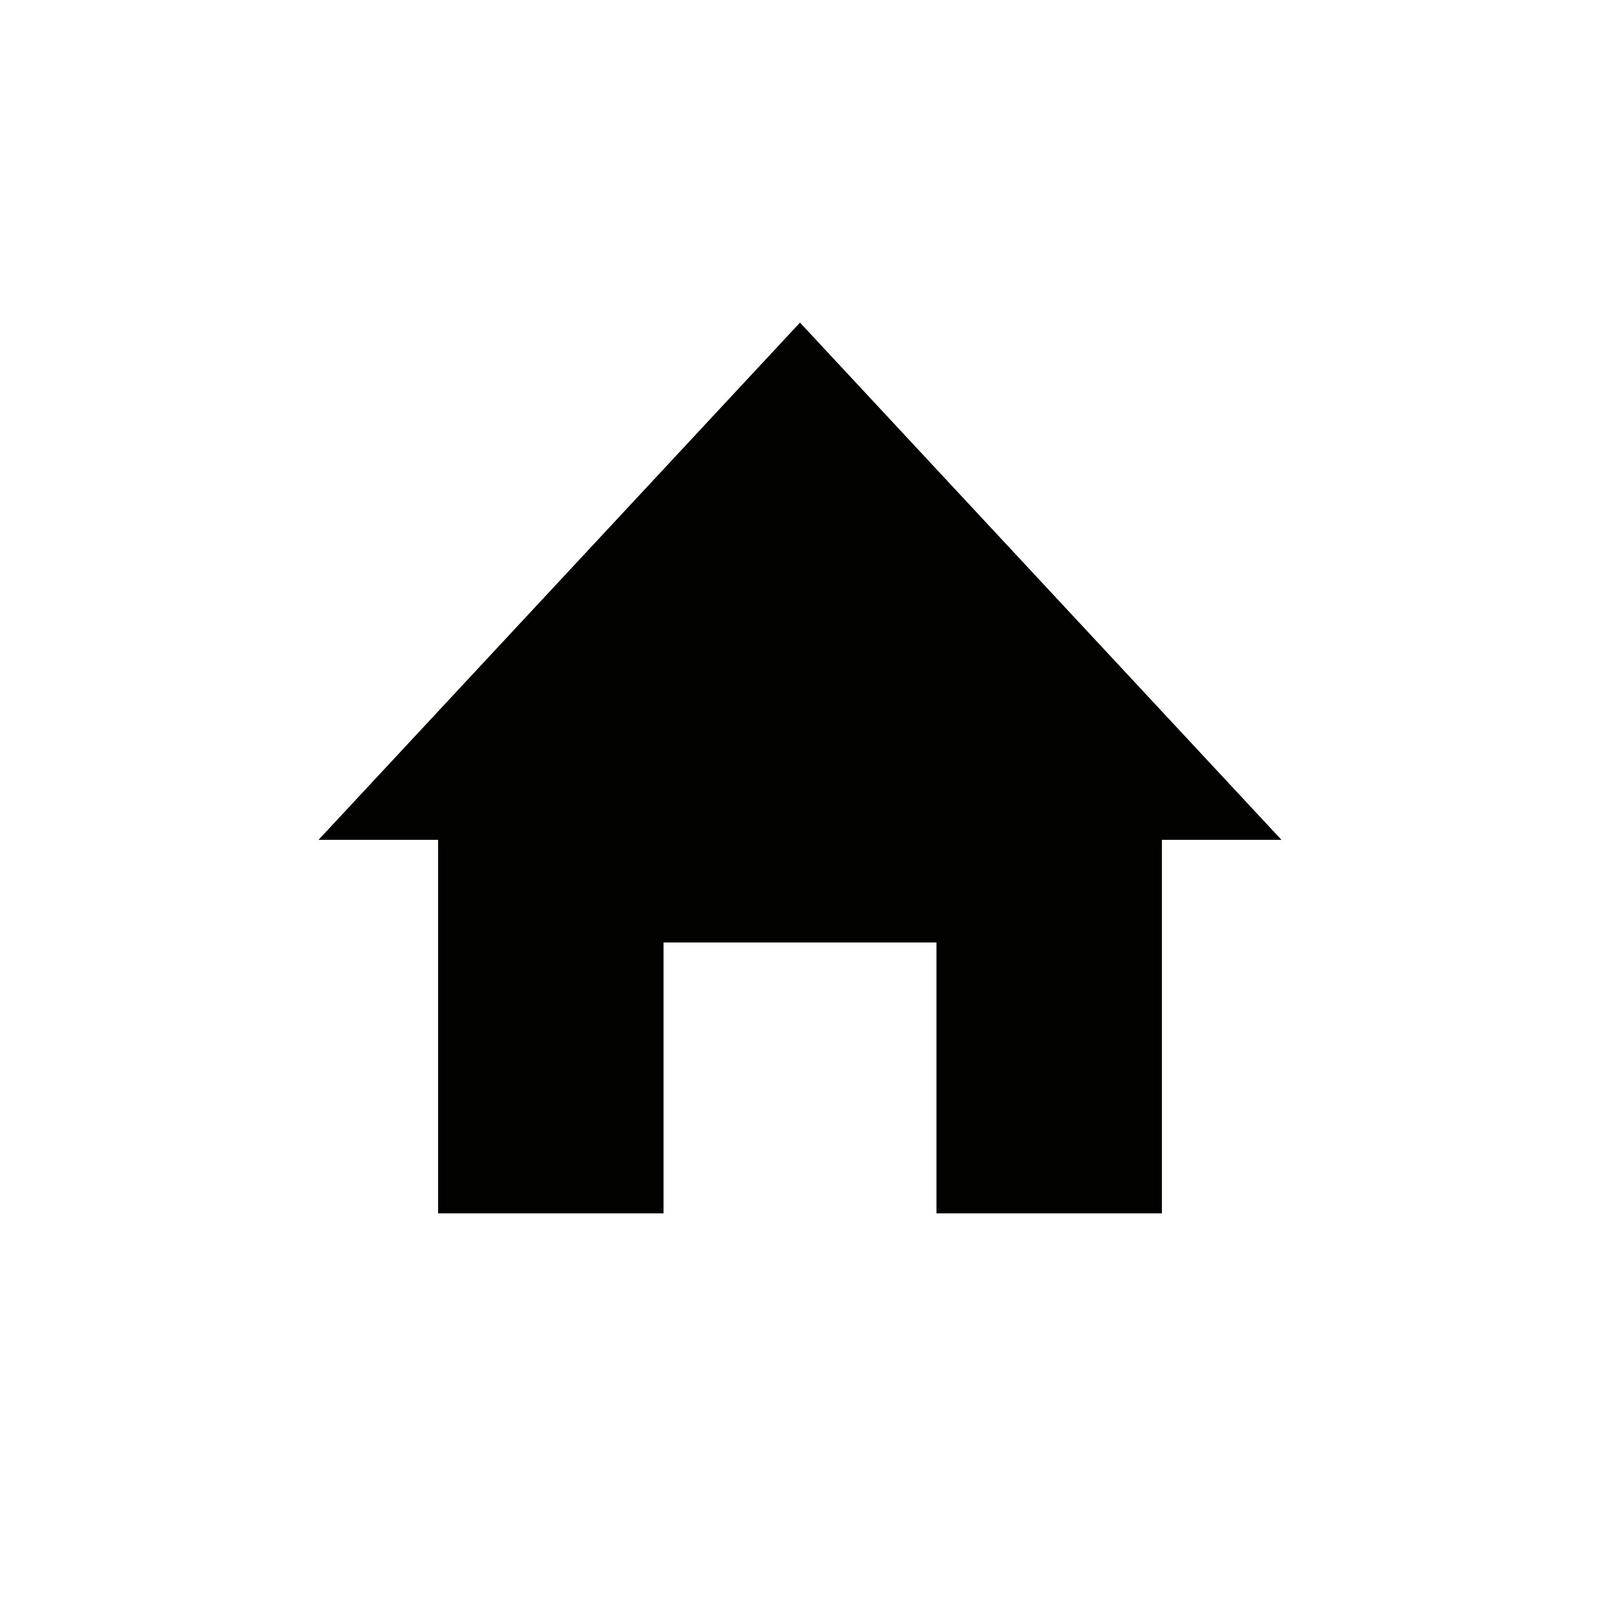 Silhouette icon of a house. Editable vector.